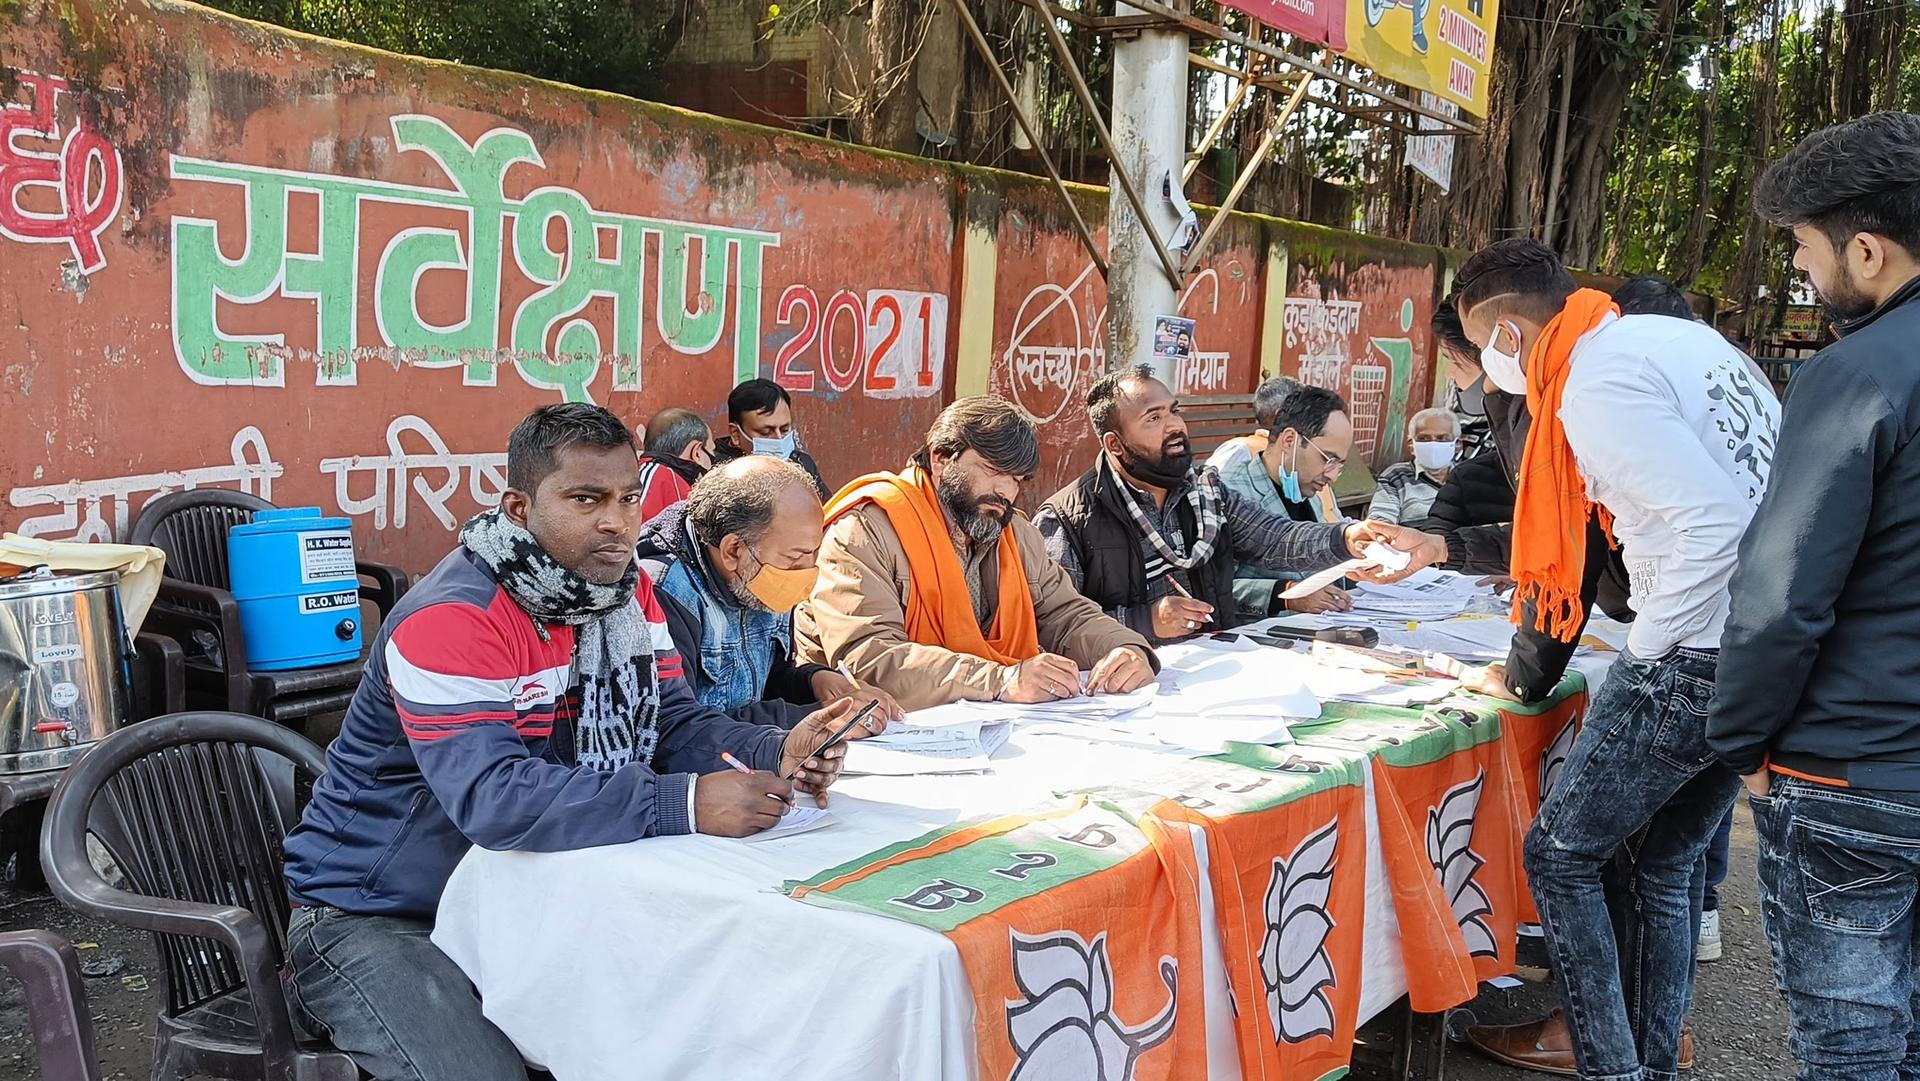 Several men supervise a voter registration table adorned with BJP flags during the election in Uttar Pradesh. 